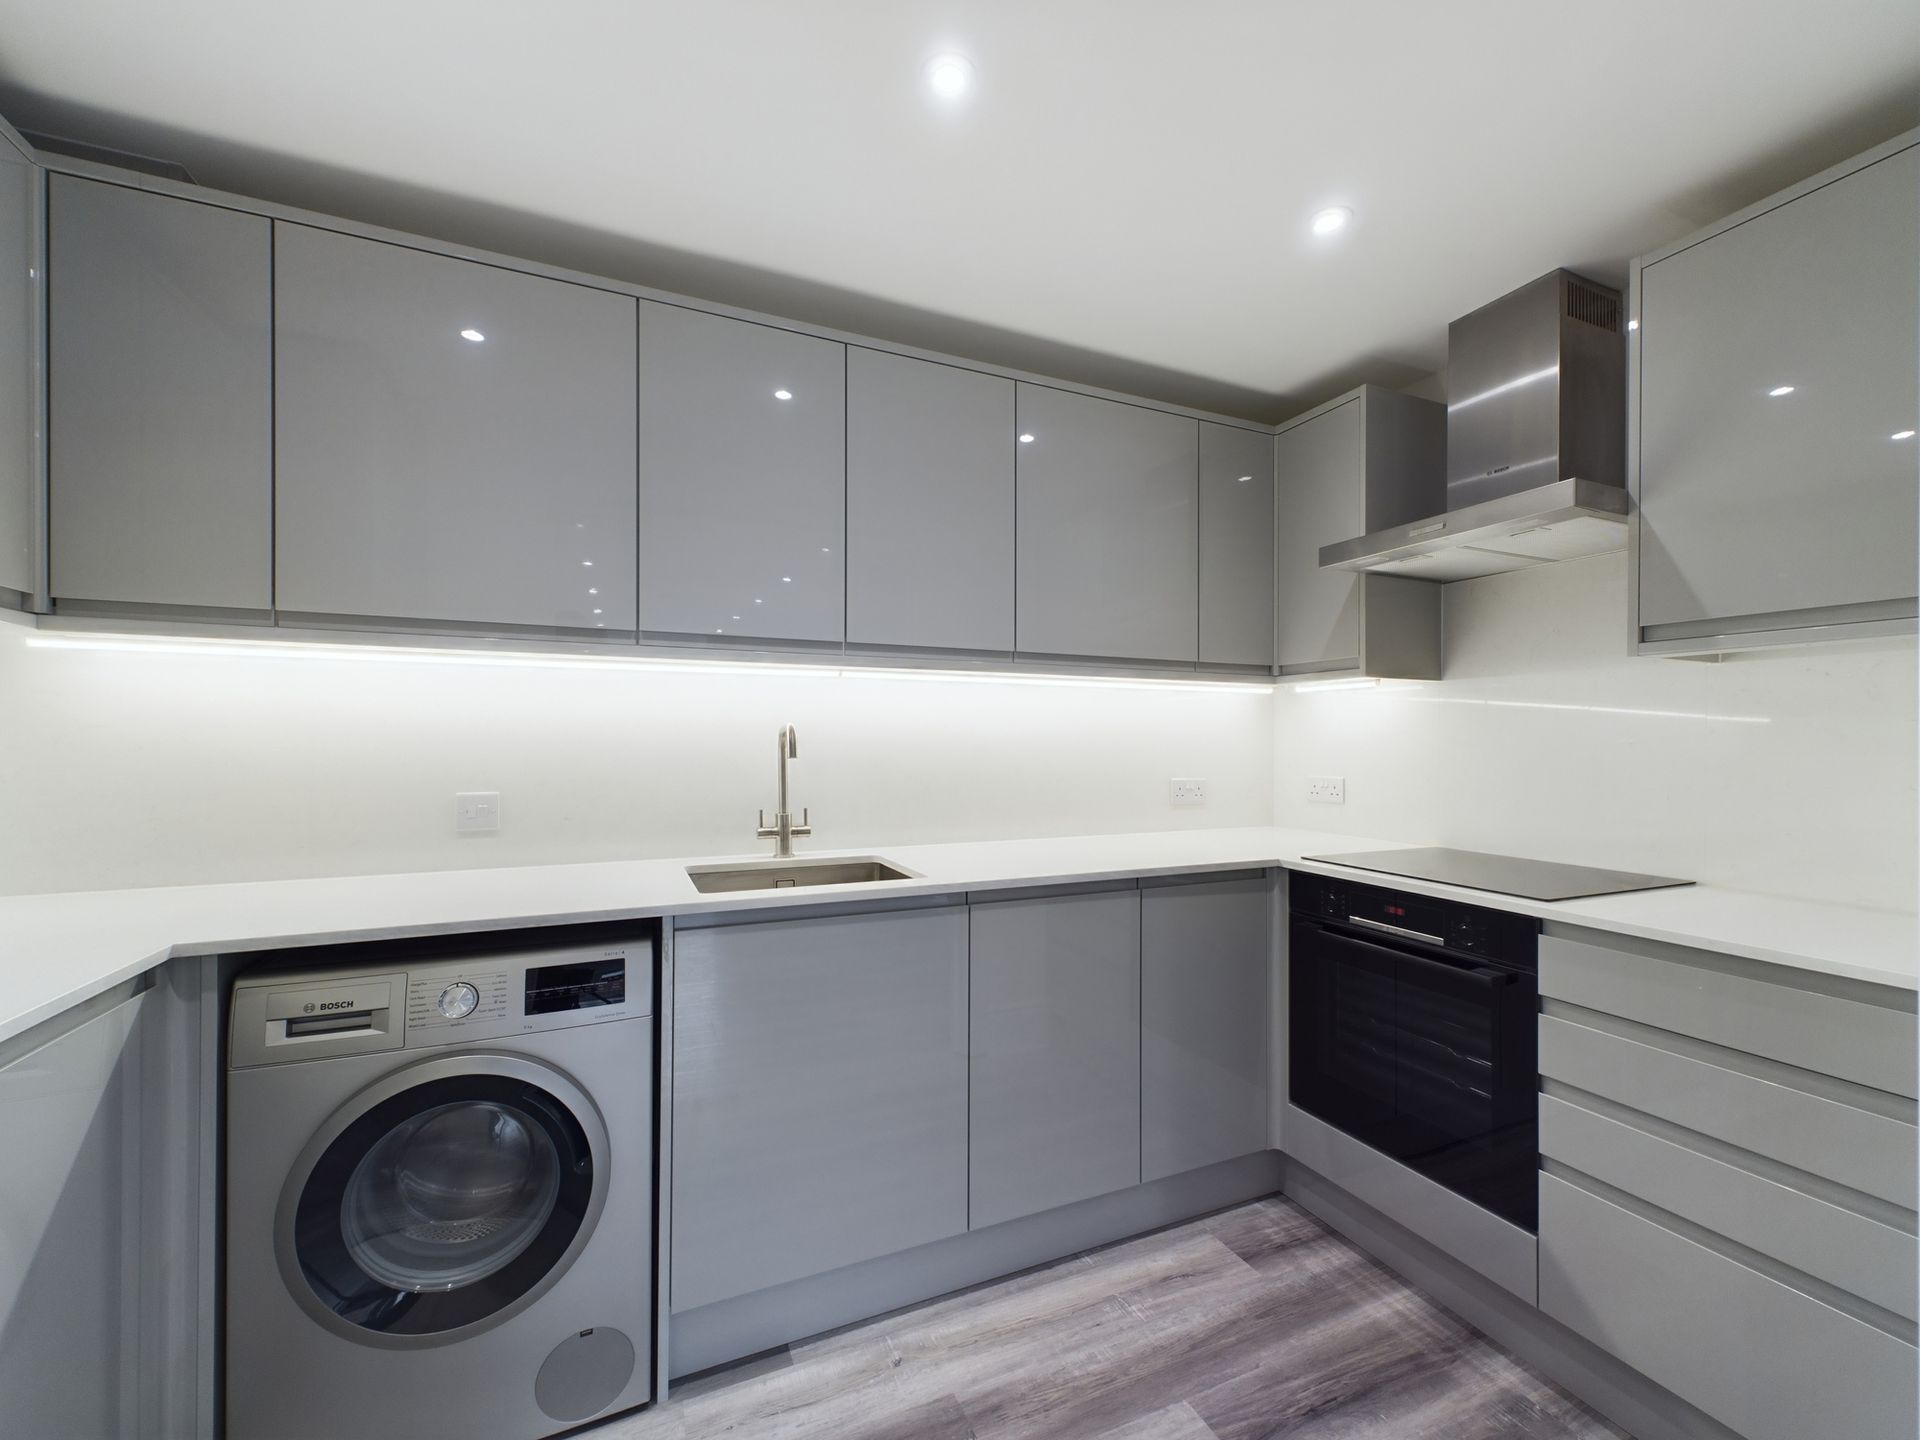 kitchen 2 bed flat to rent reading refurbished